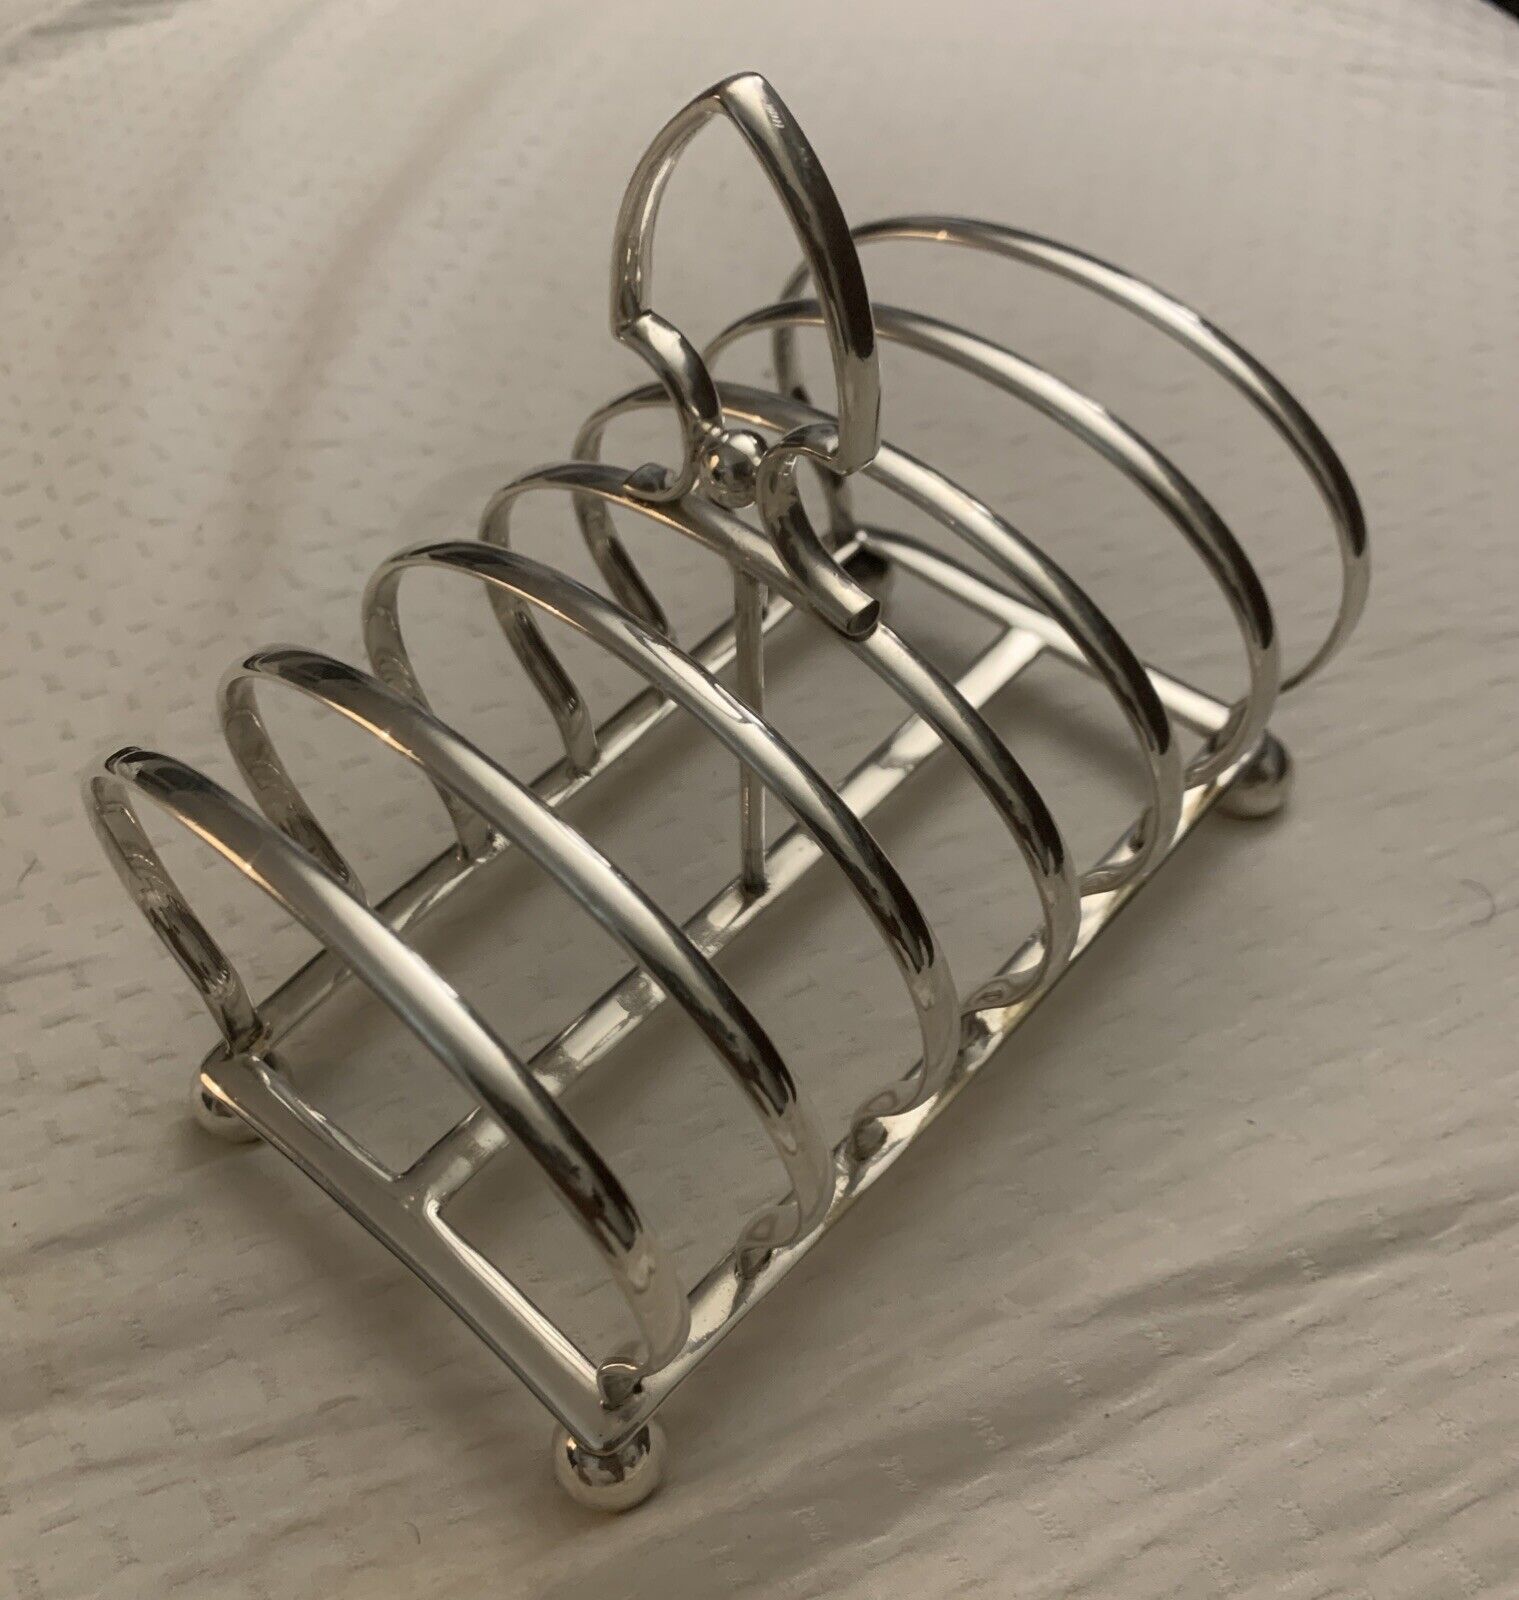 Vintage Silver Plated EPNS Toast Rack  with 6 Slots - Made in England